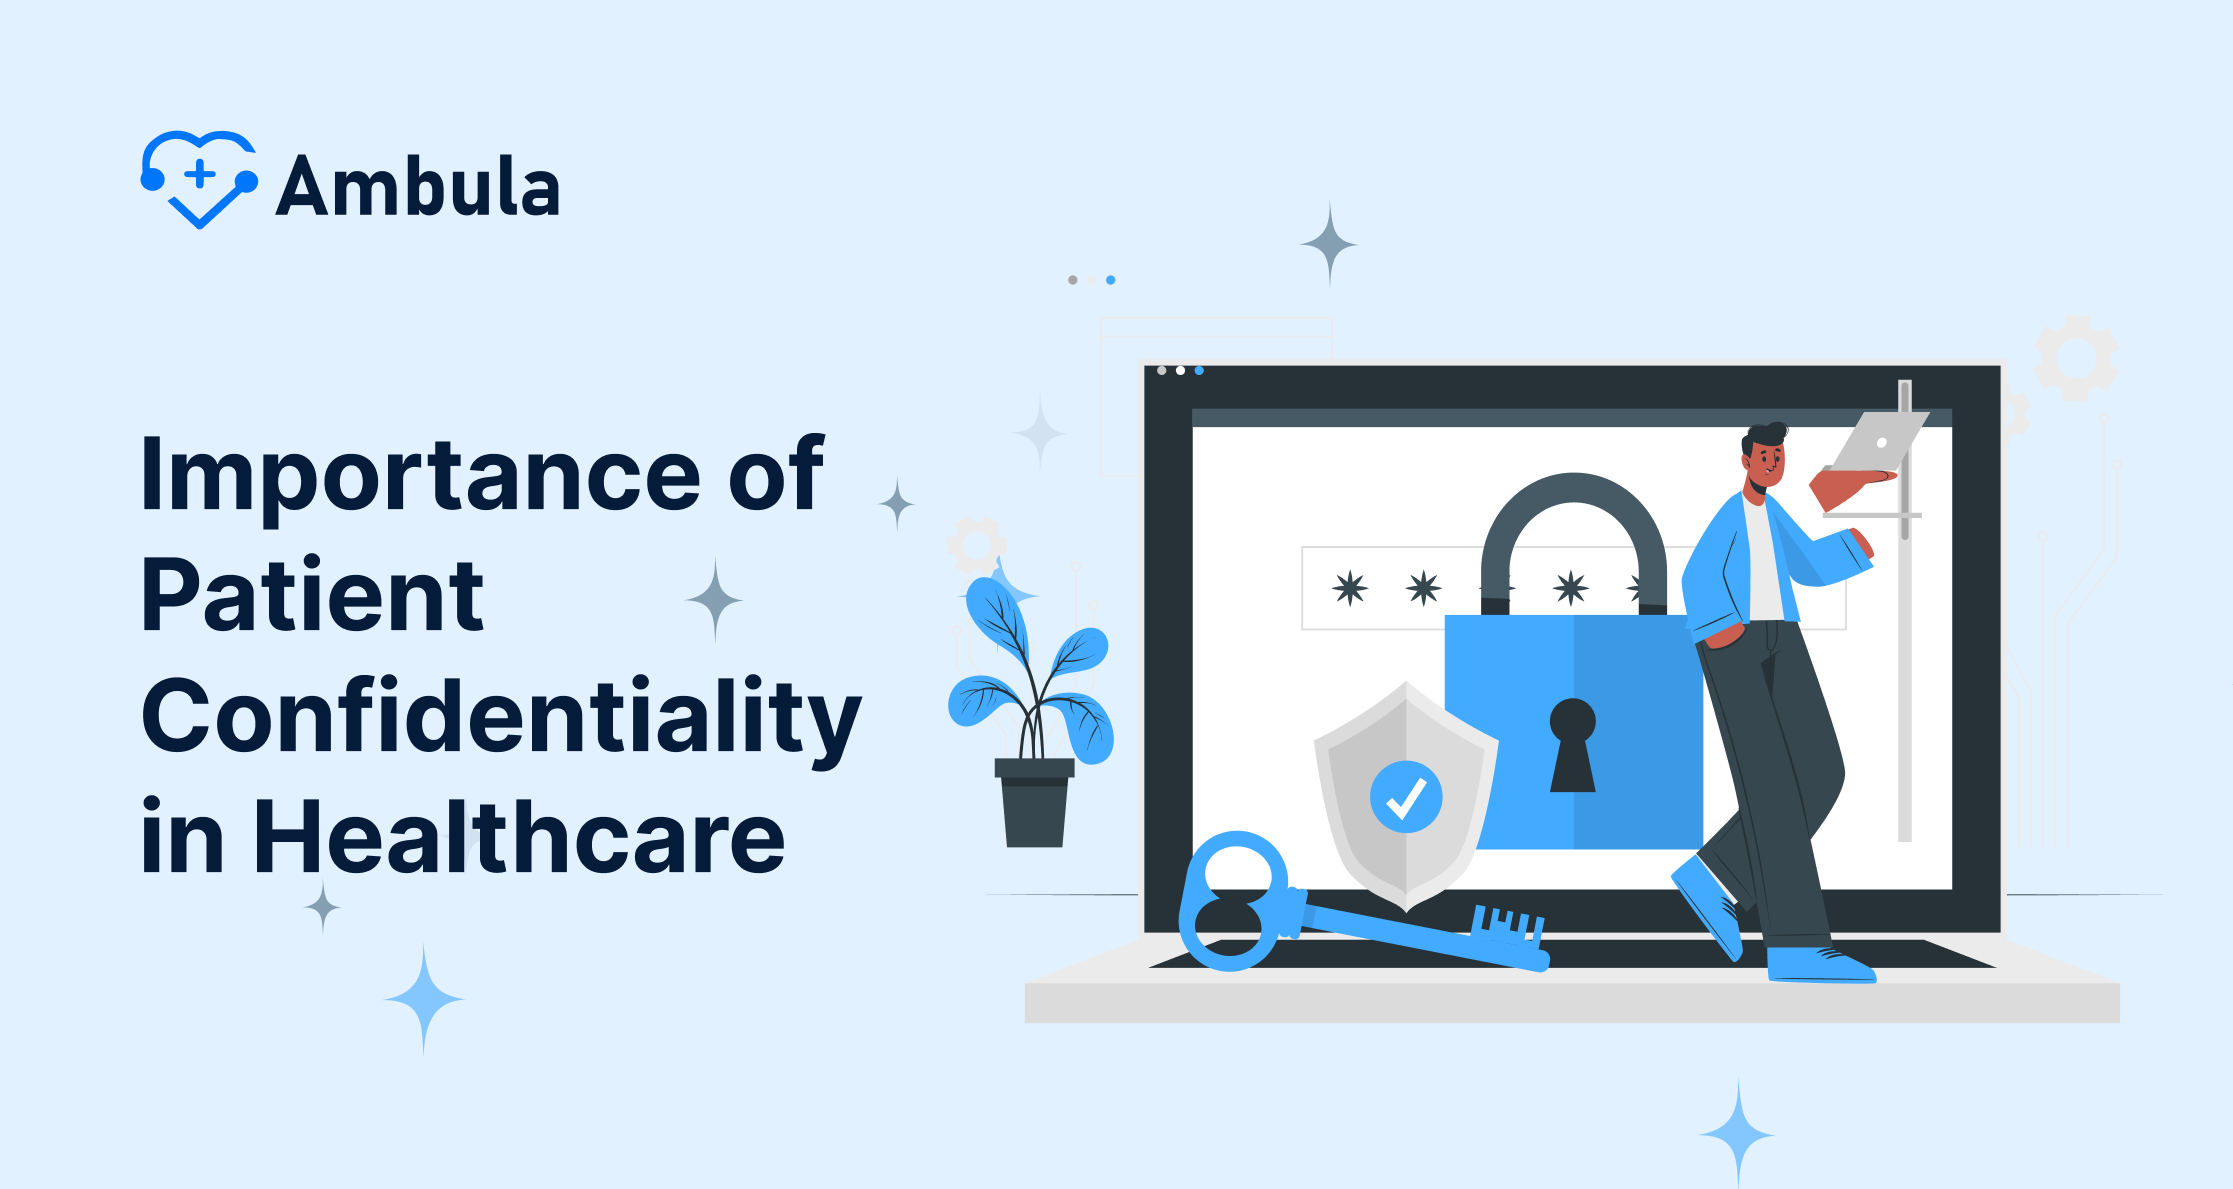 Importance of Patient Confidentiality in Healthcare